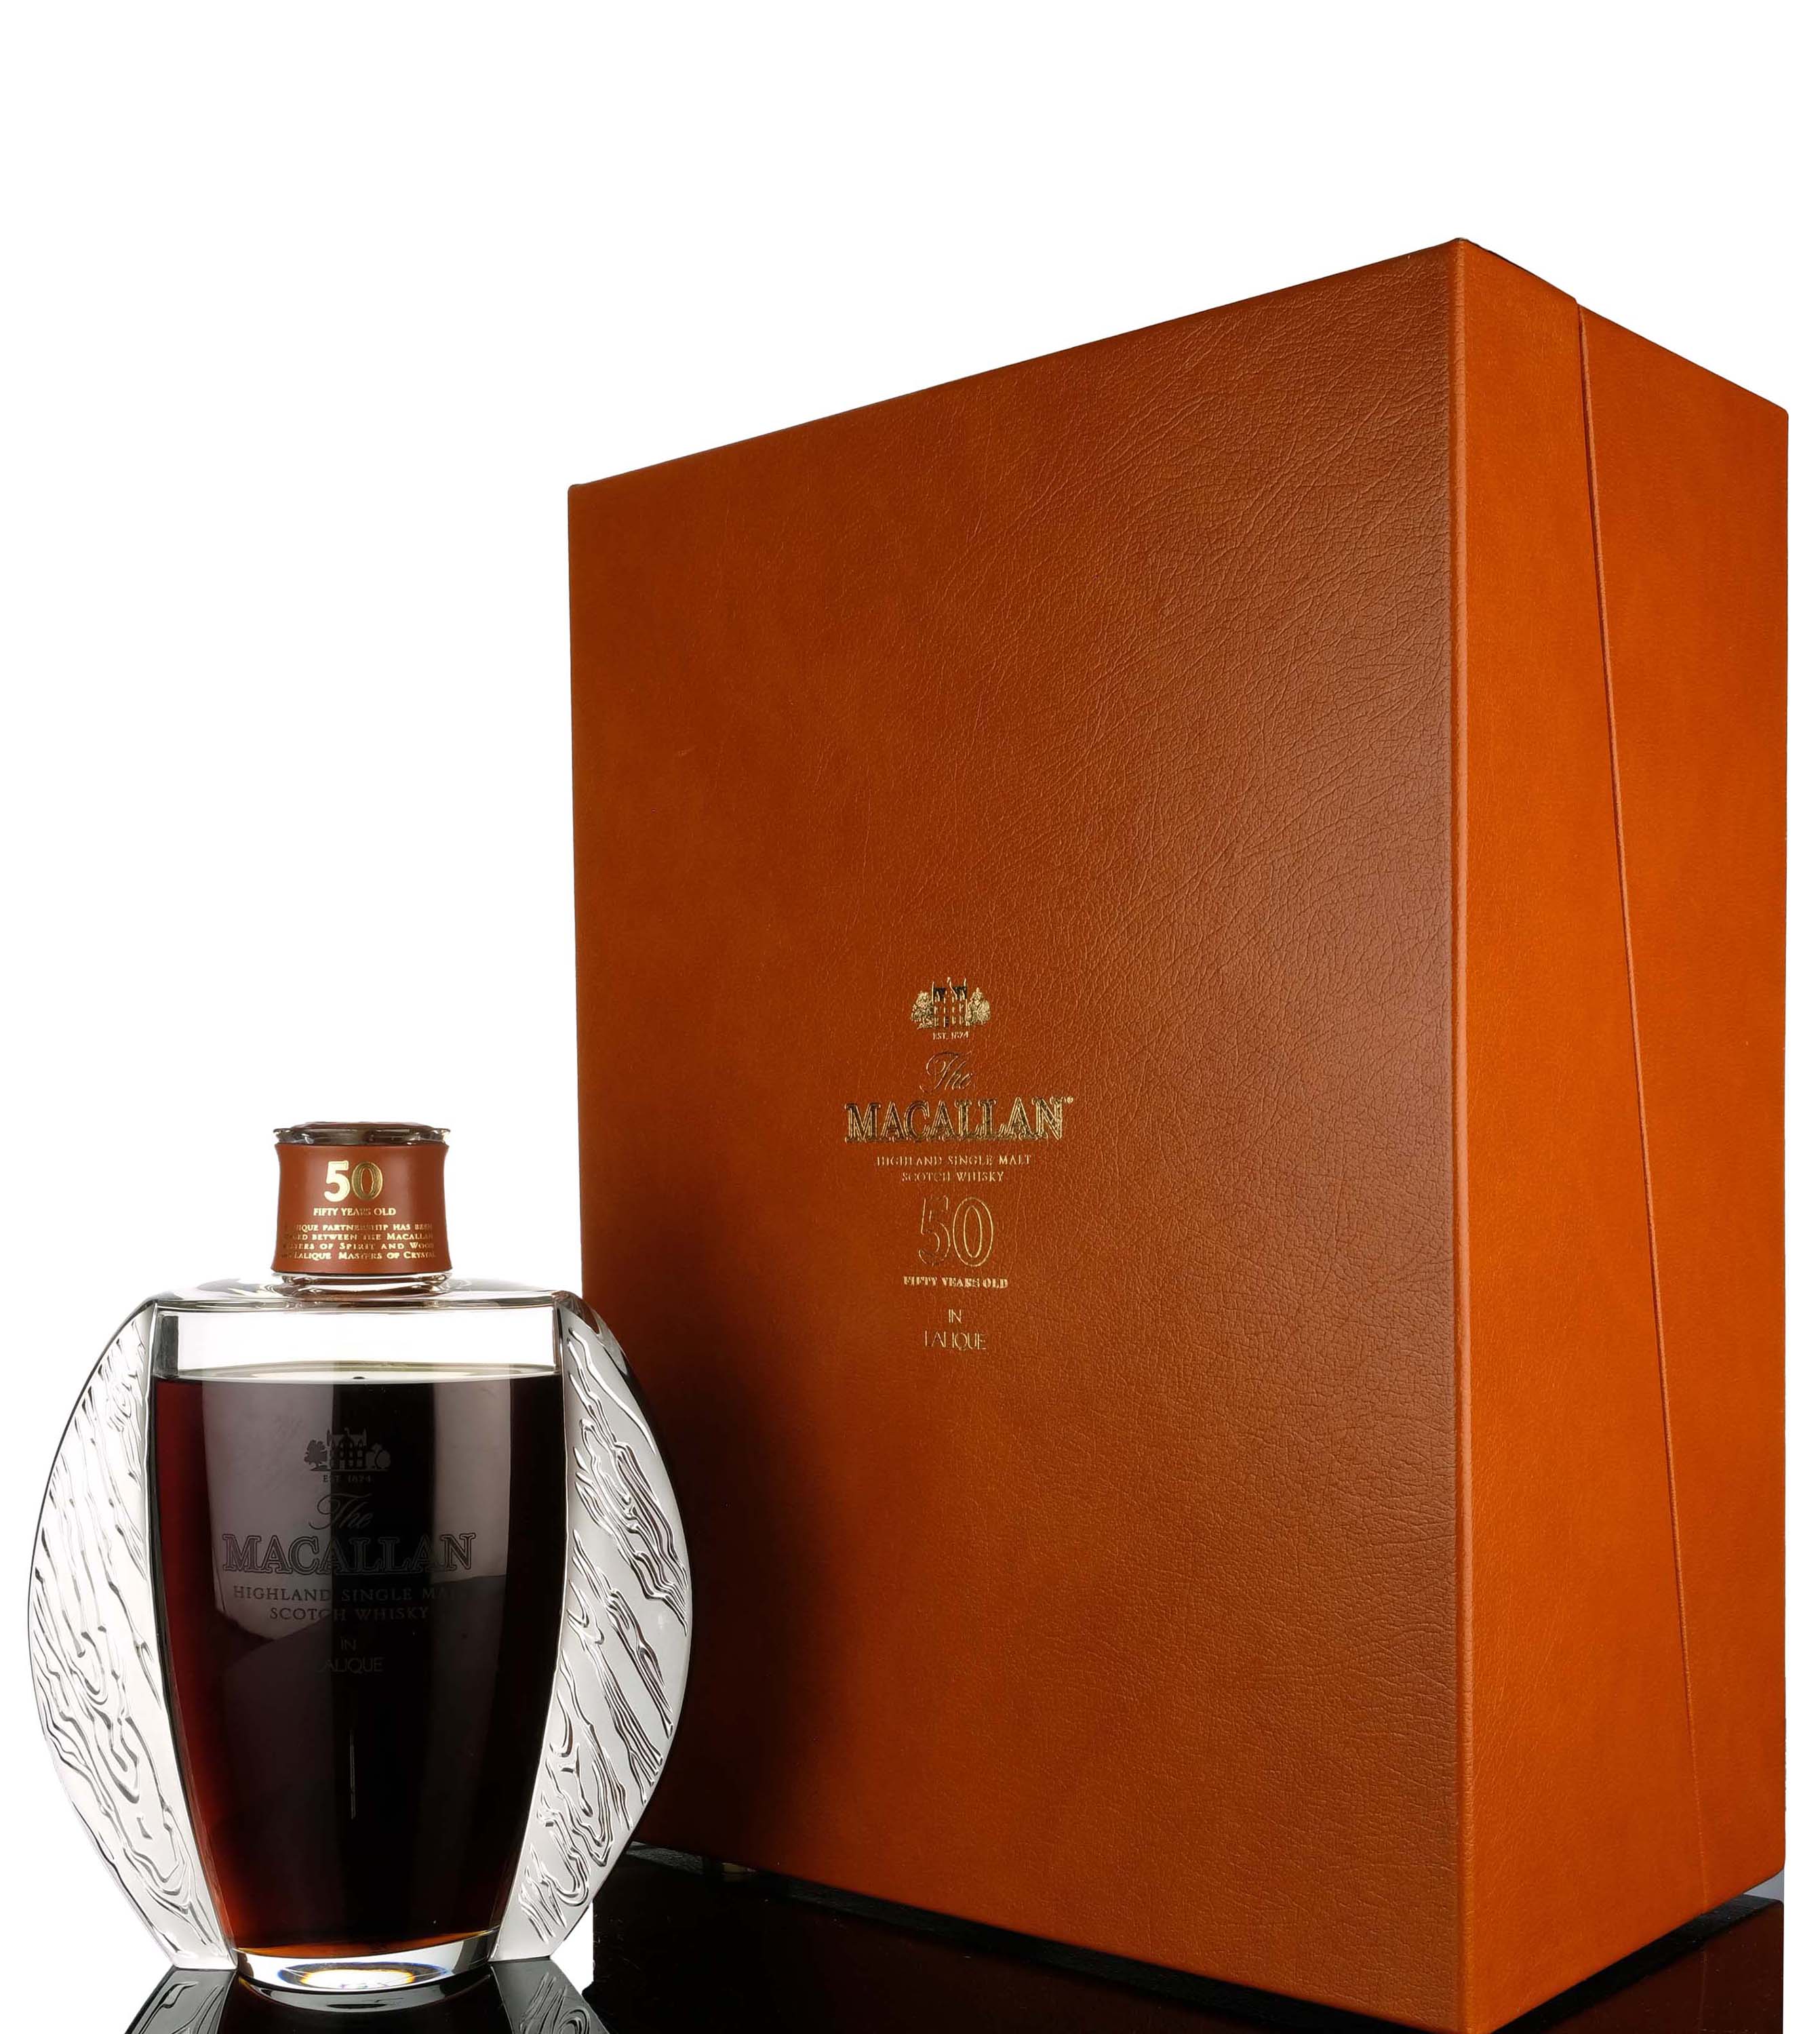 Macallan 50 Year Old - Six Pillars 1st Edition - Lalique Crystal Decanter - 2005 Release